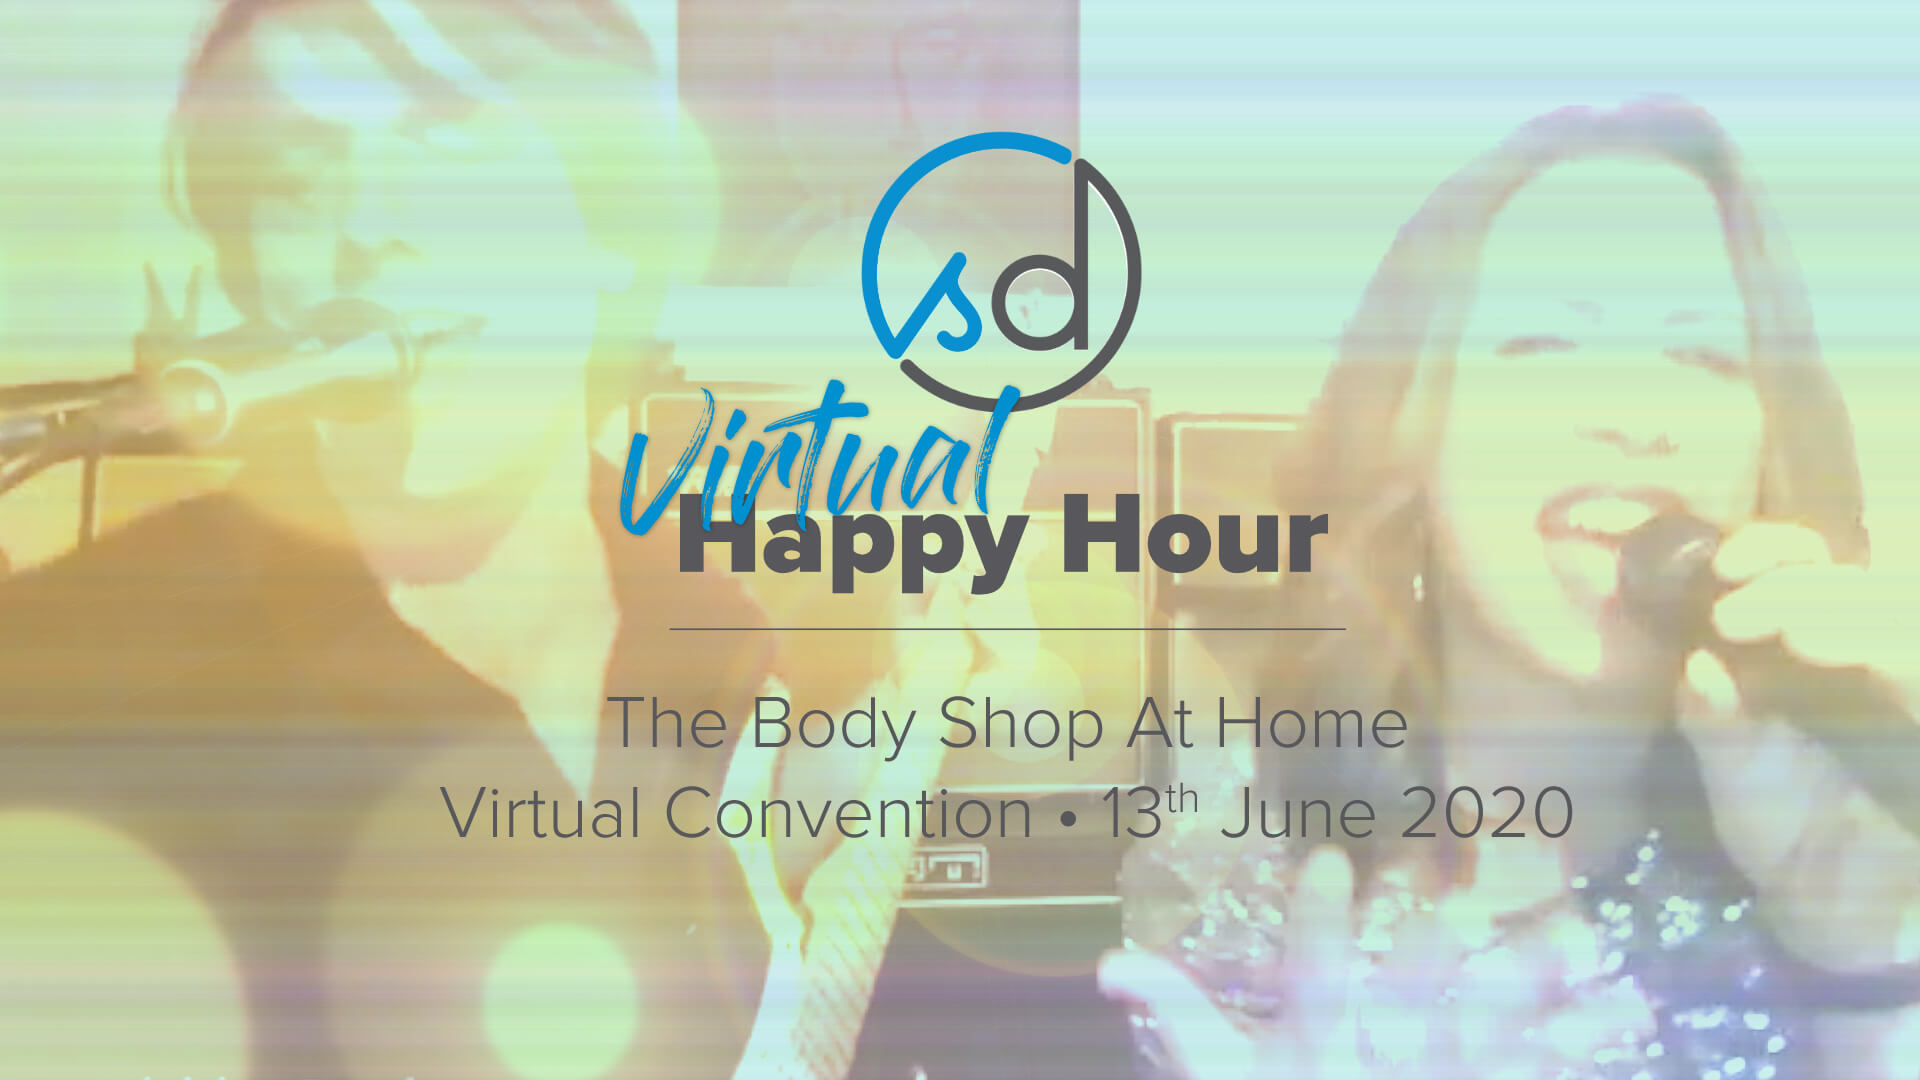 The Body Shop At Home + Virtual Happy Hour